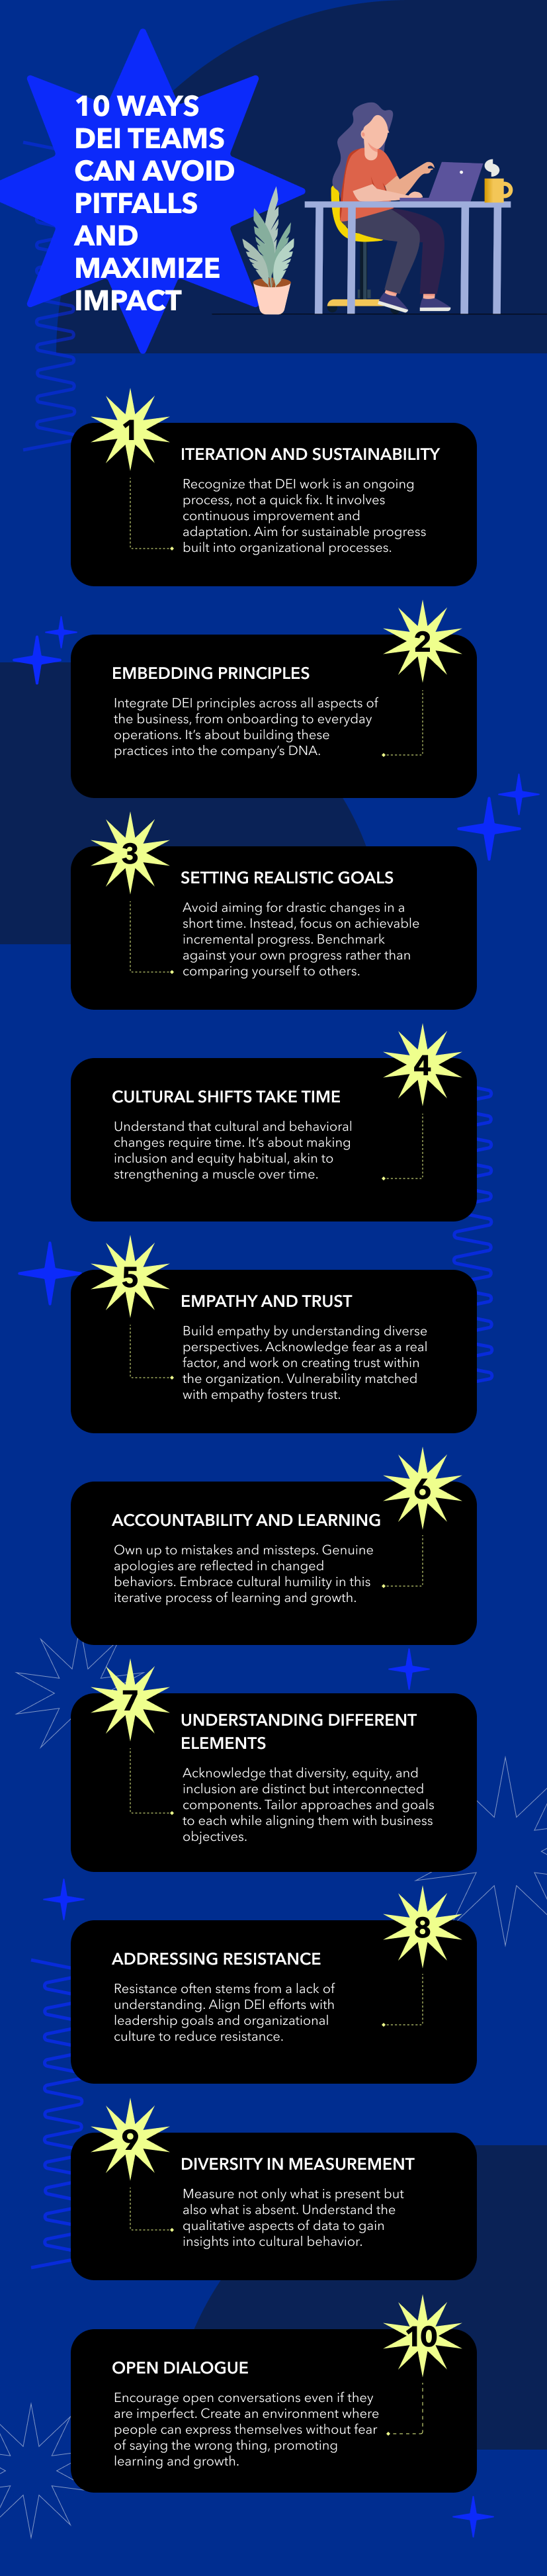 10 Ways DEI Teams Can Avoid Pitfalls and Maximize Impact Infographic